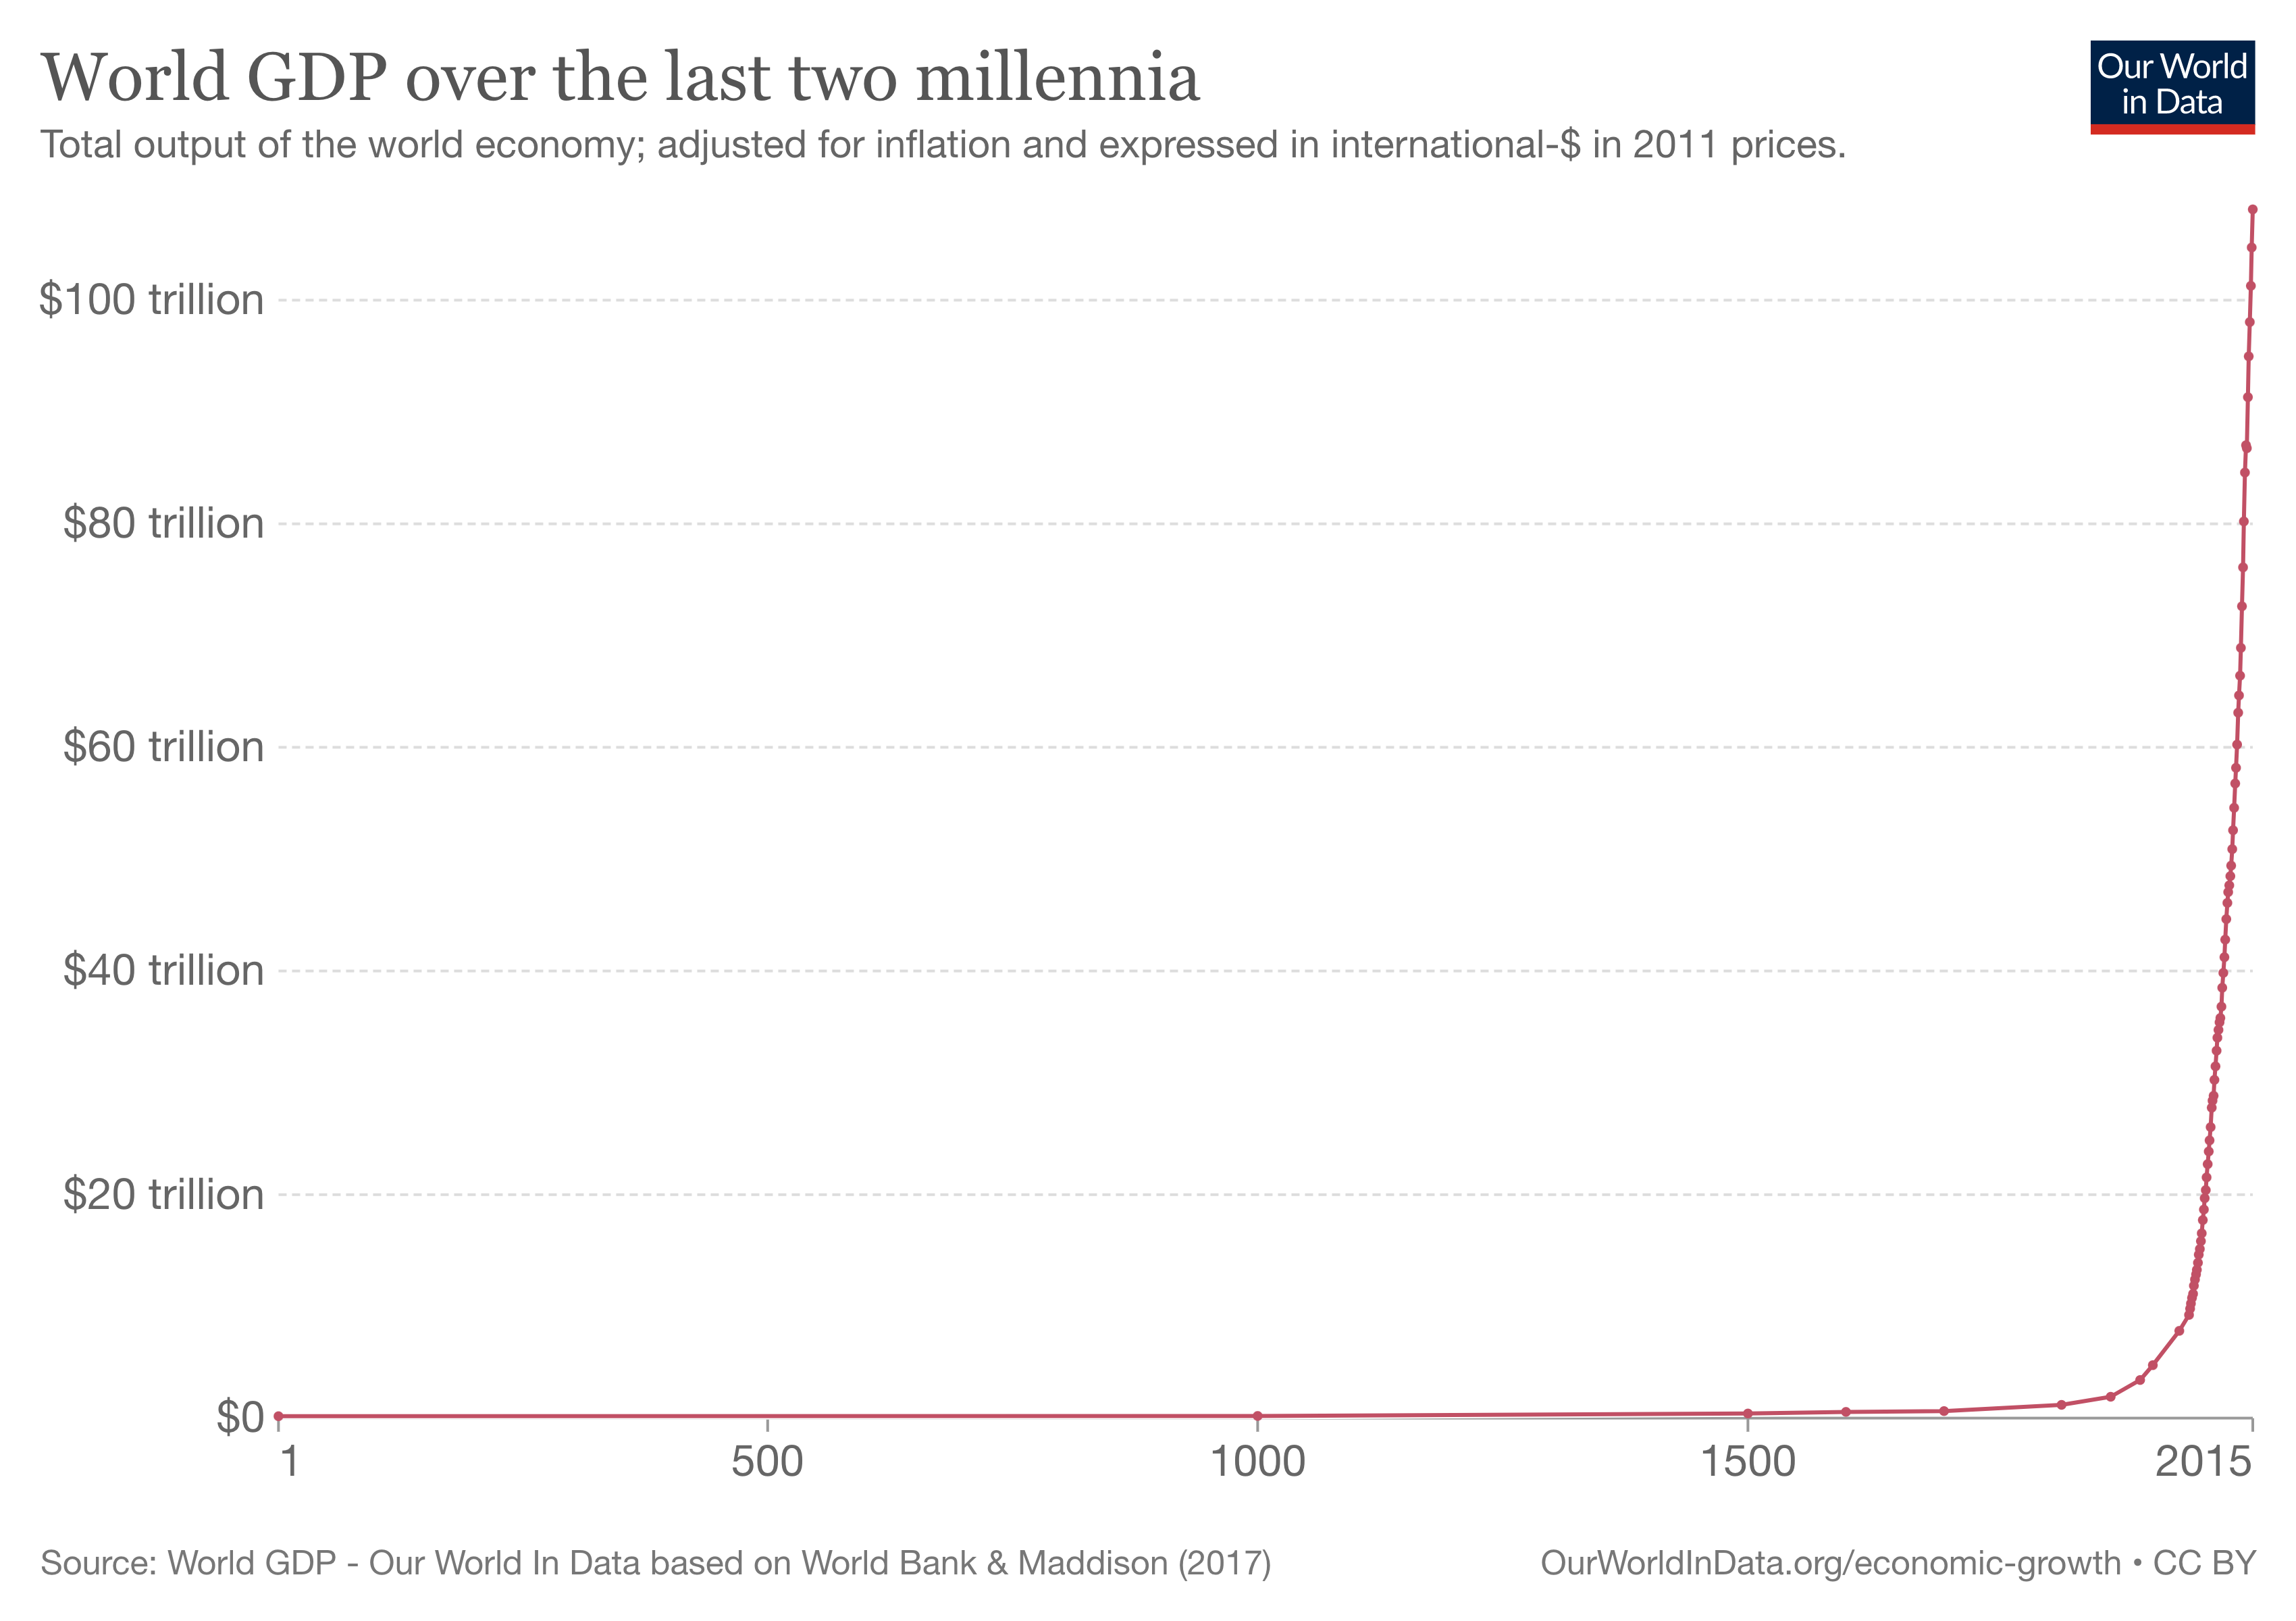 World GDP over the last two millennia